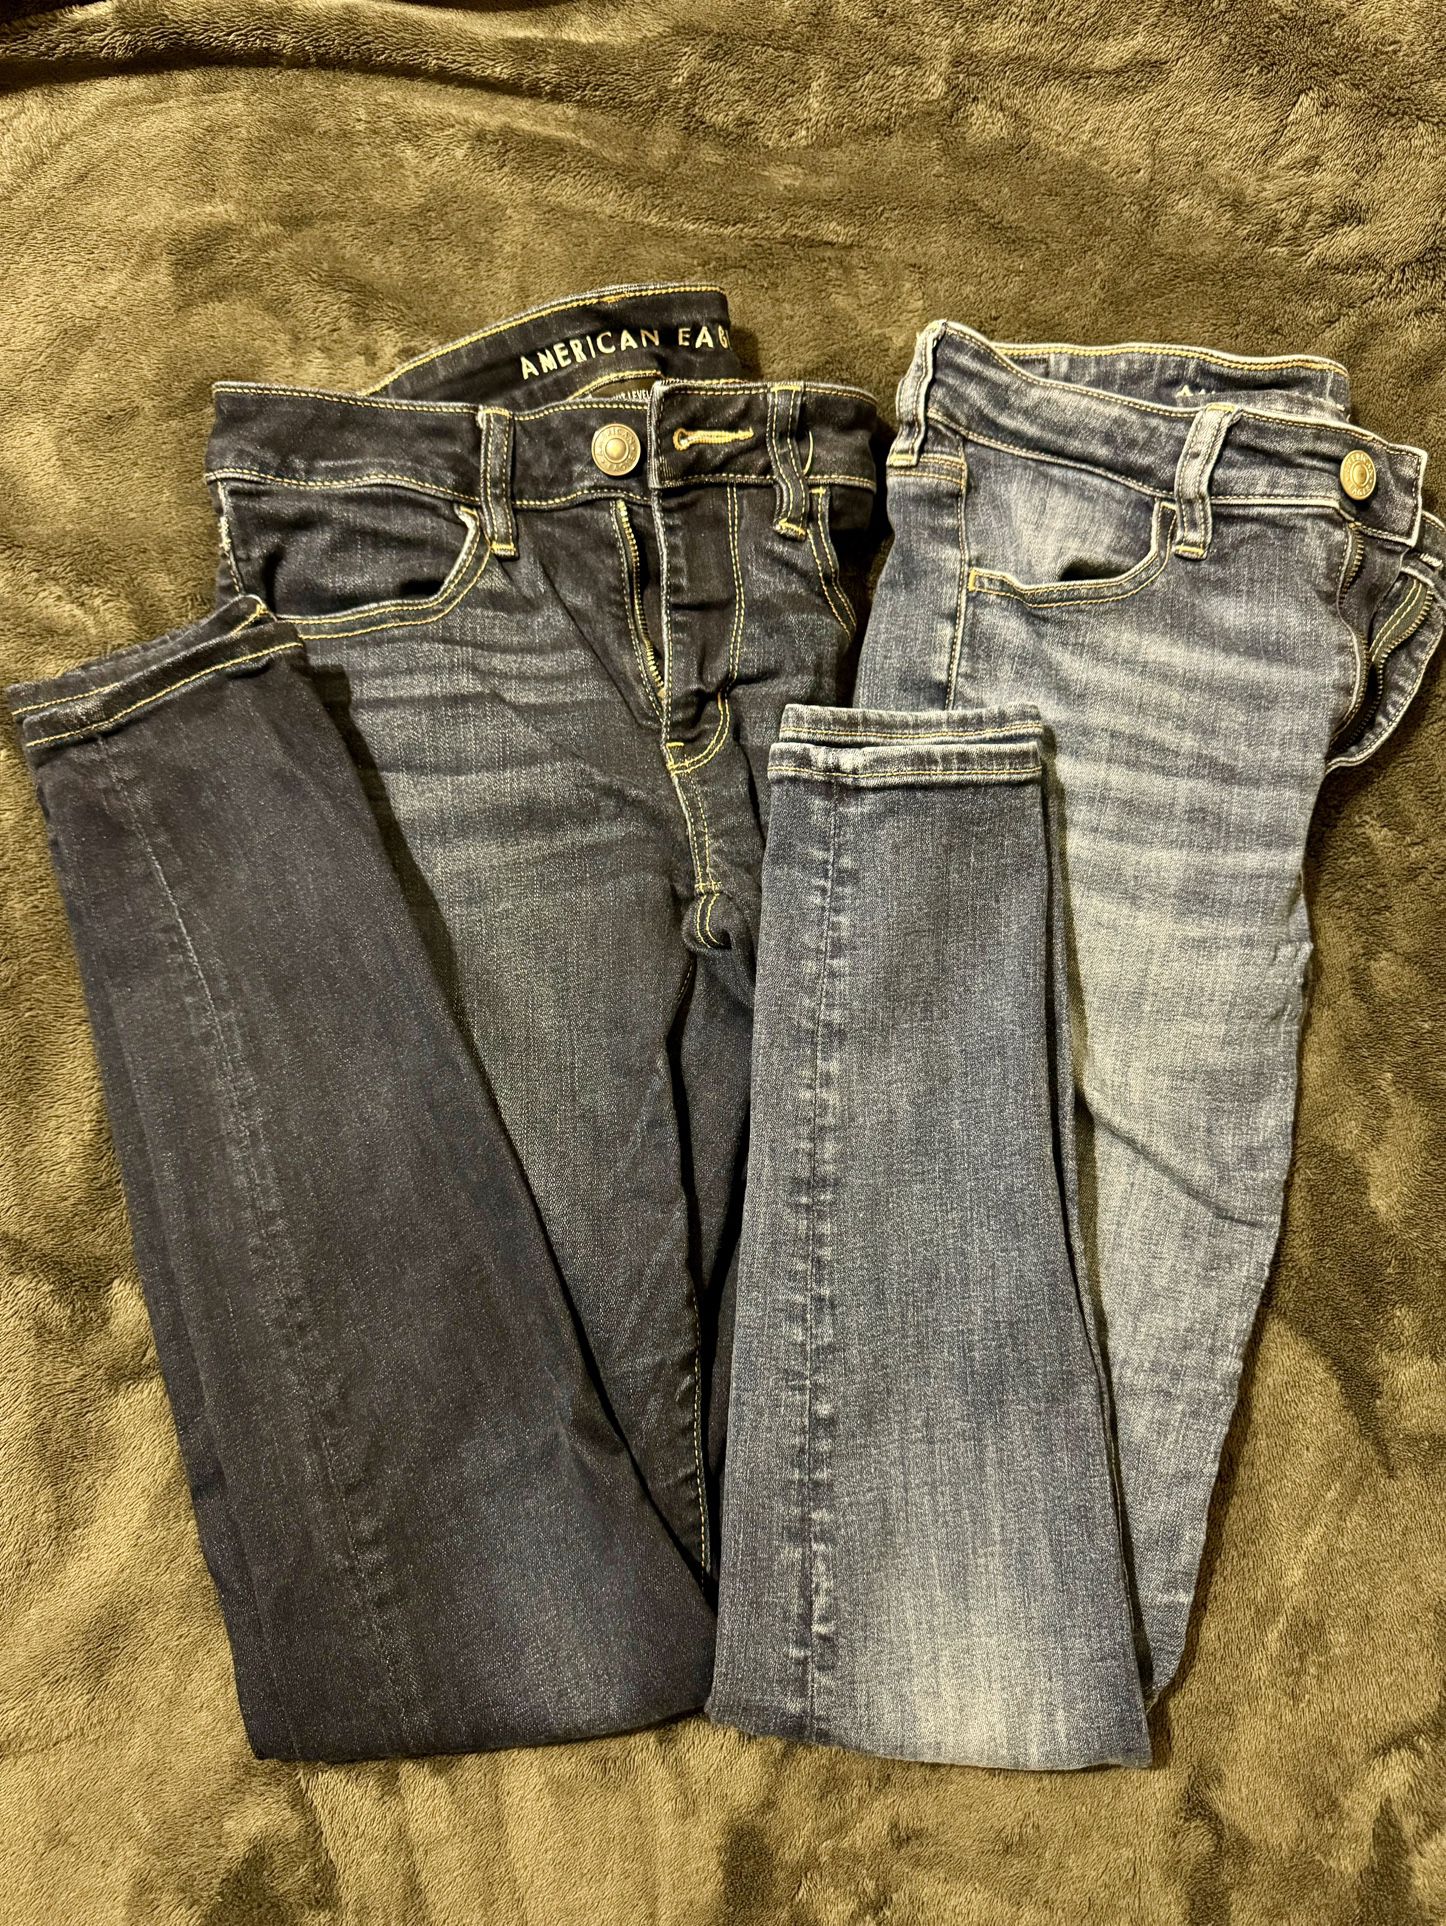 Size 6Long American Eagle Jeans